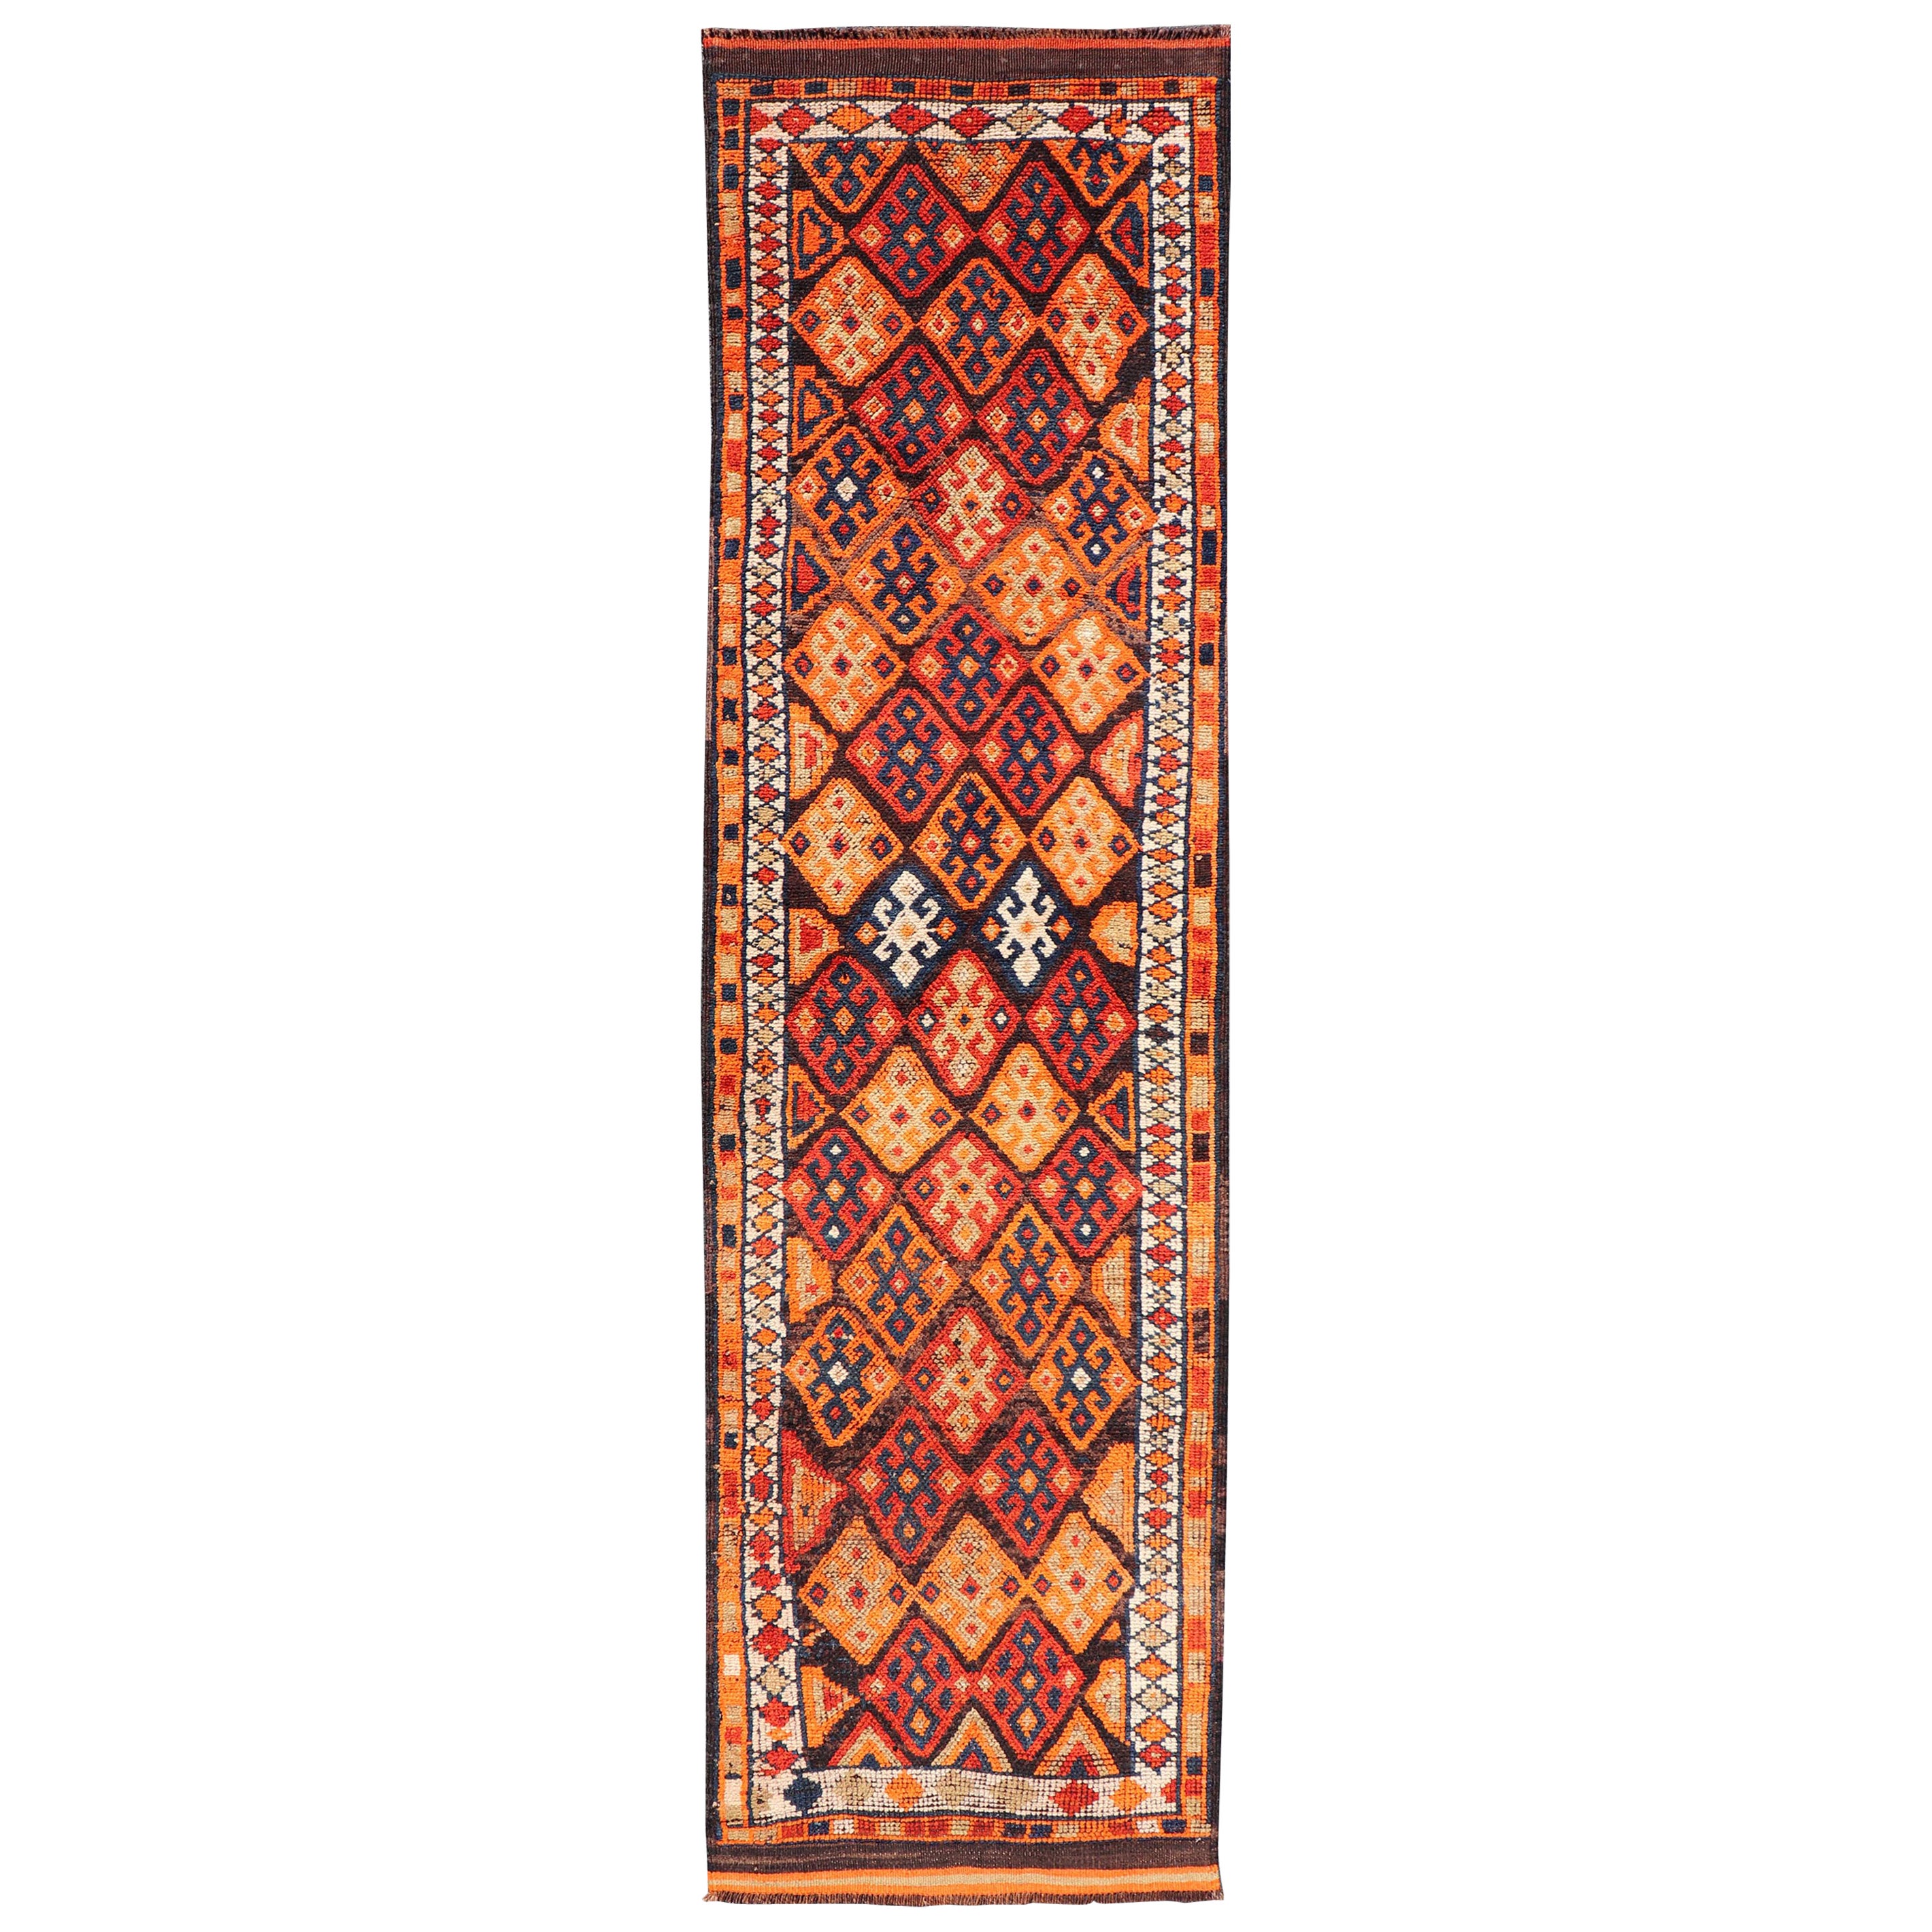 Vintage Turkish Runner with All-Over Diamond Tribal Design in Multi-Colors